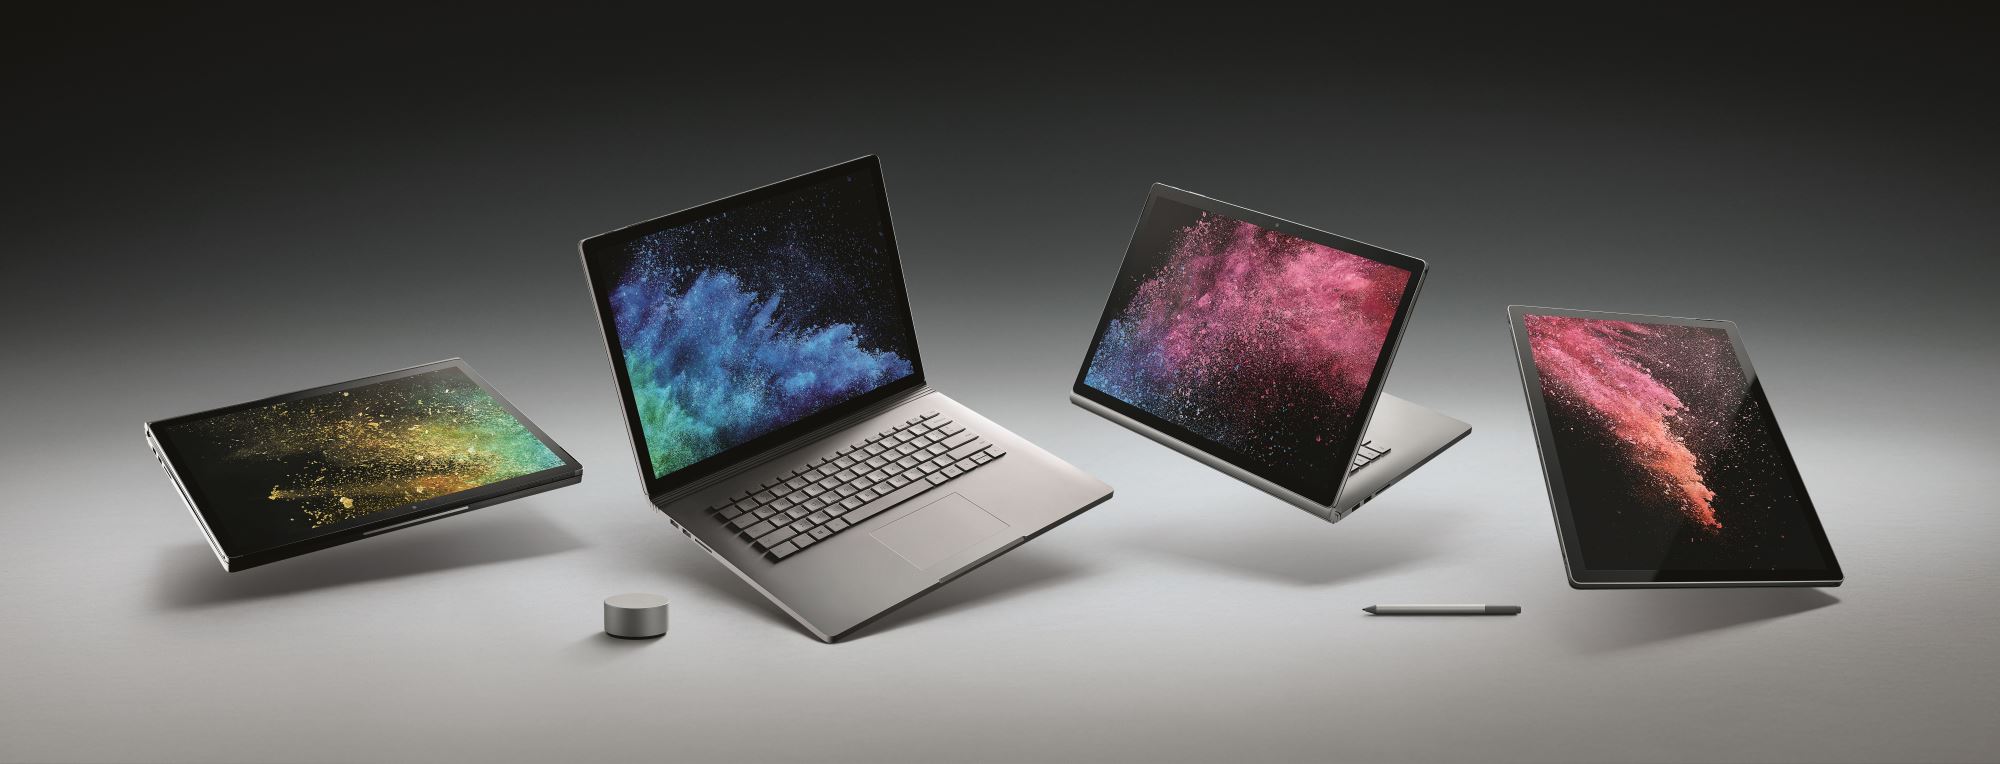 Microsoft Introduces Surface Book 2: 7th/8th Generation i5/i7 CPUS 